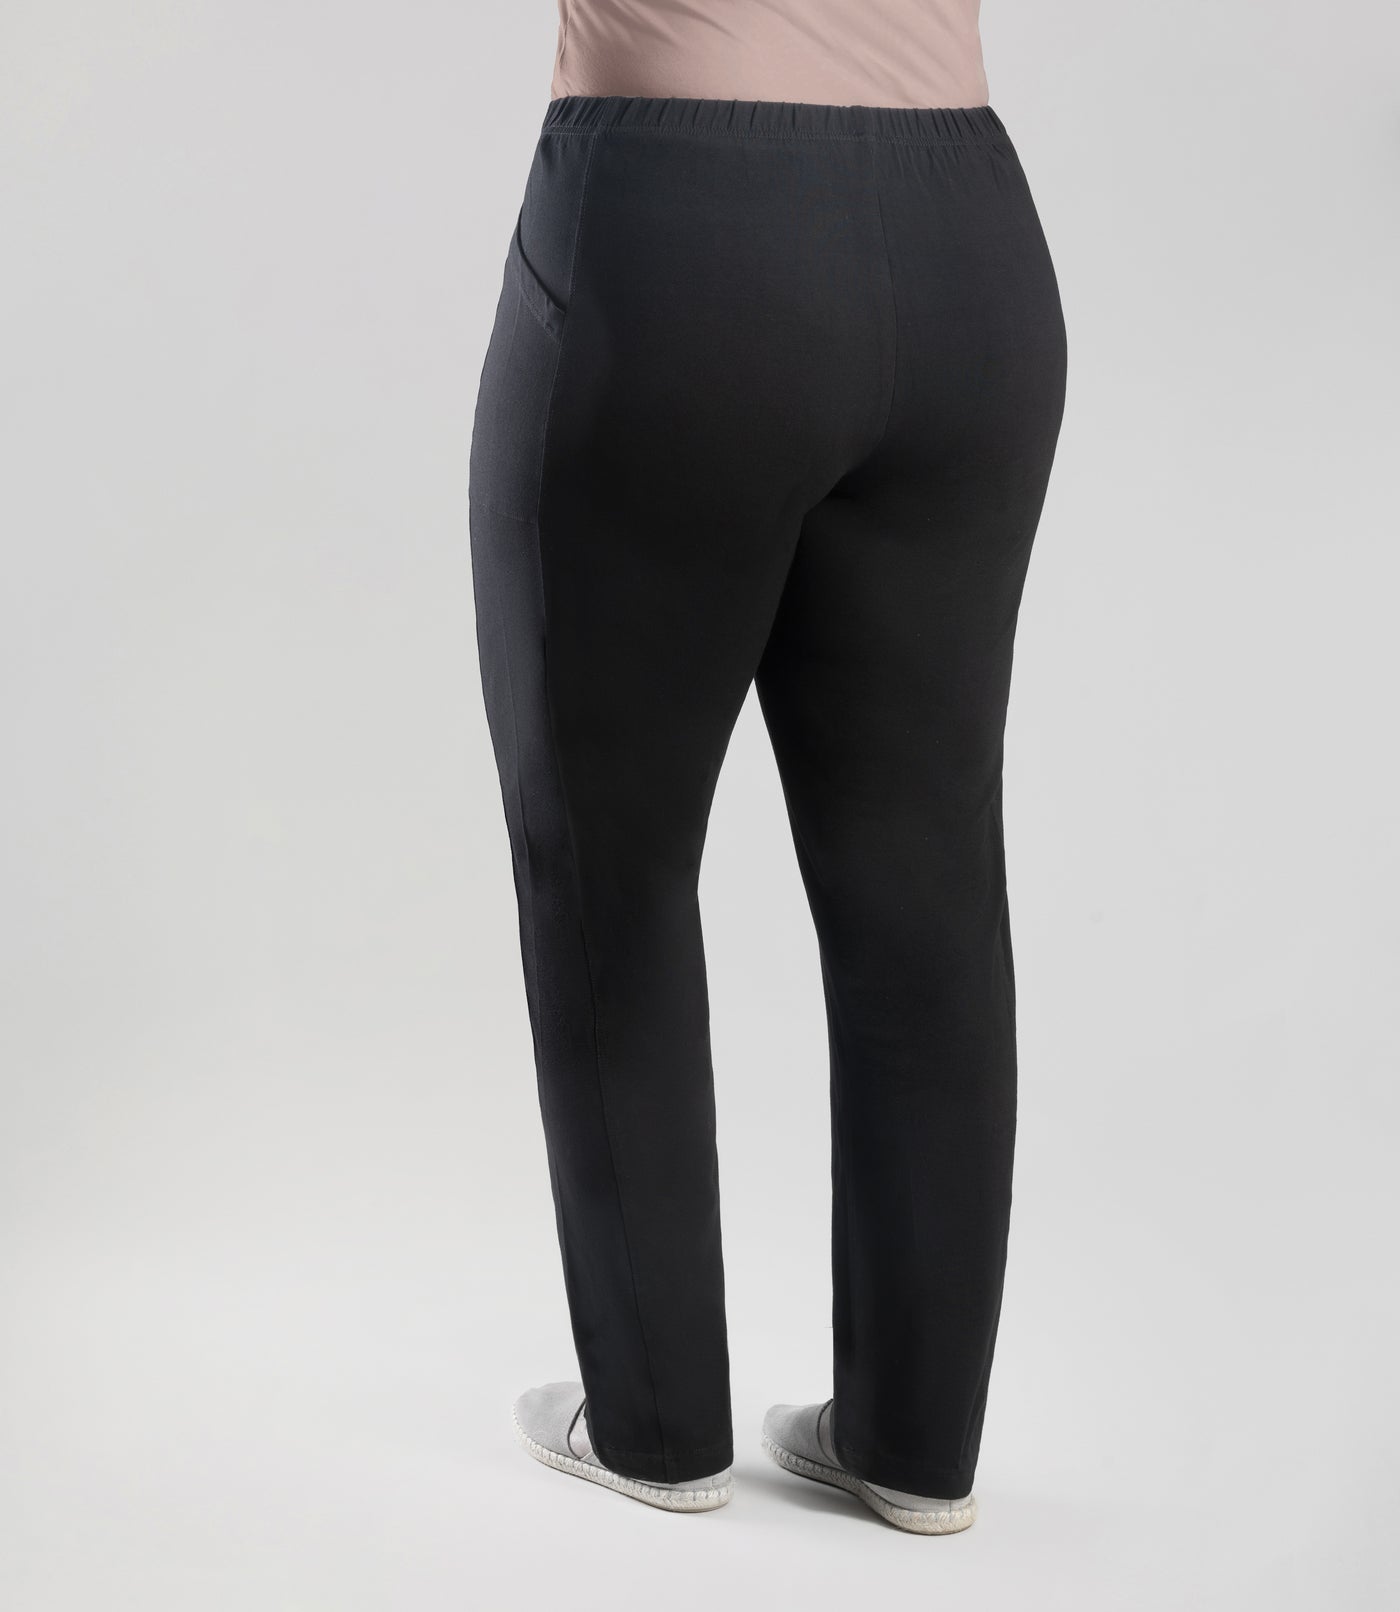 Bottom half of plus sized woman, back view, wearing JunoActive Stretch Naturals Side Pocket Loose Fit Leggings in color black. Bottom hem is at the ankle